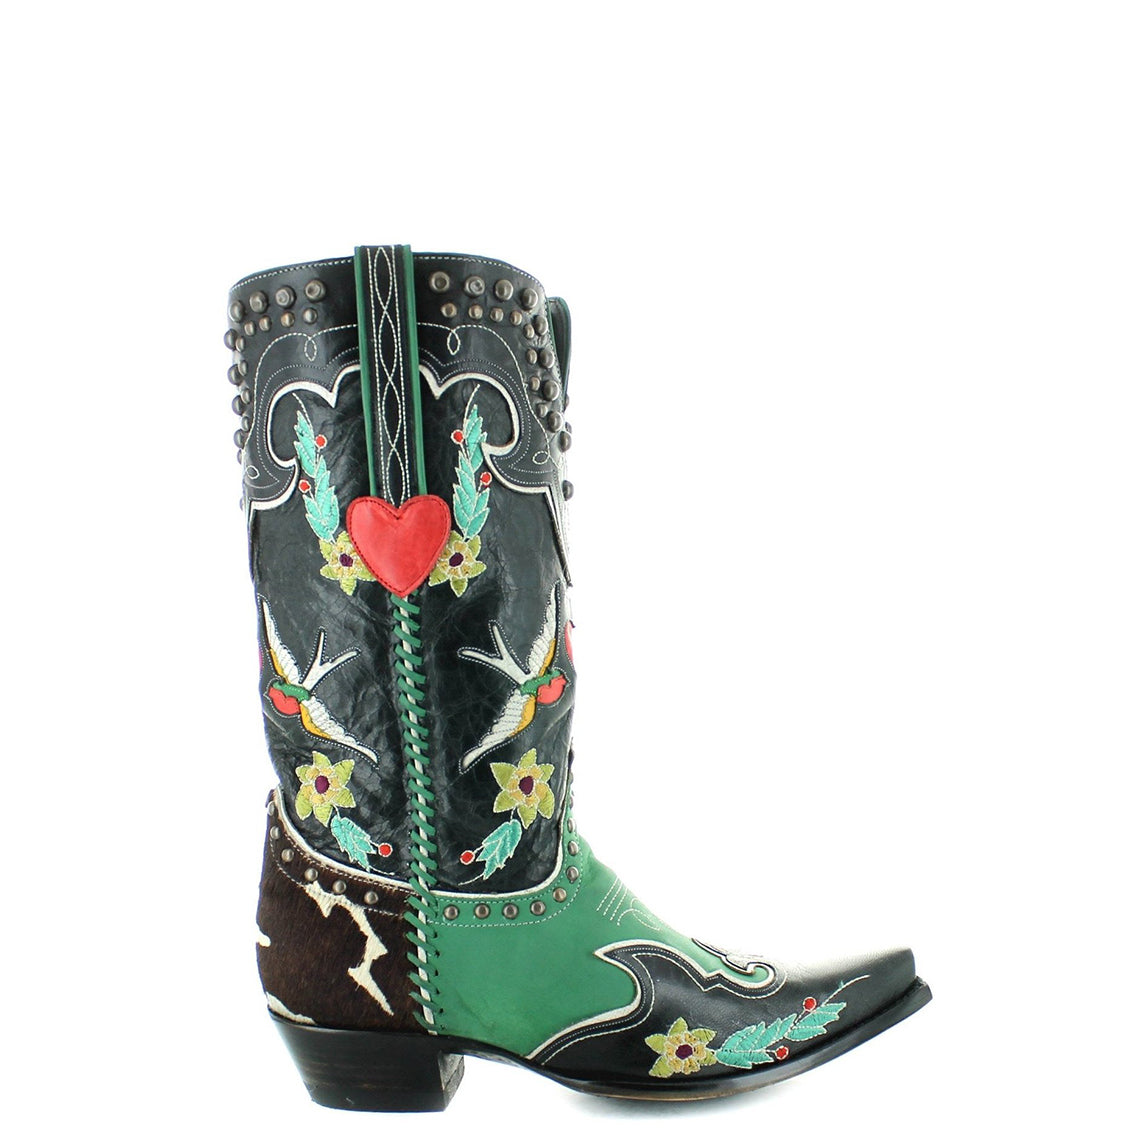 Green tweed, diamonds and cowboy boots - ALL-I-C